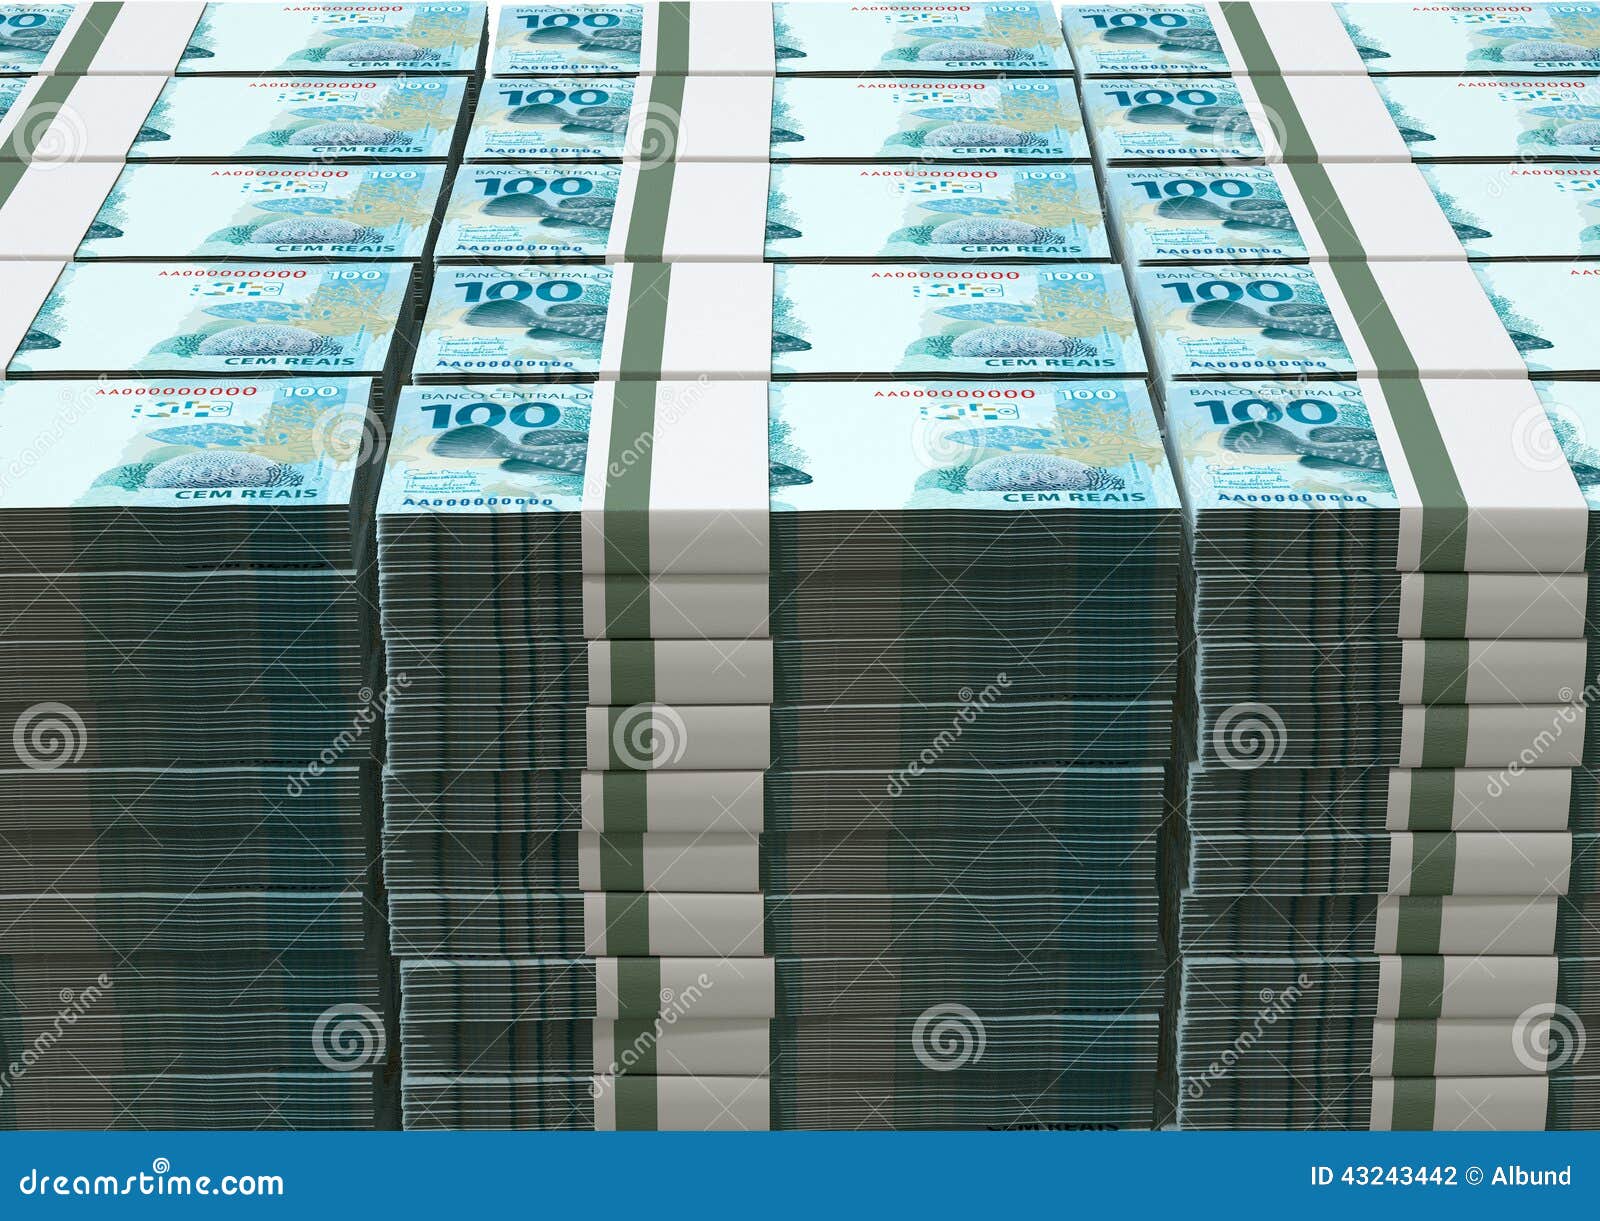 brazilian real notes